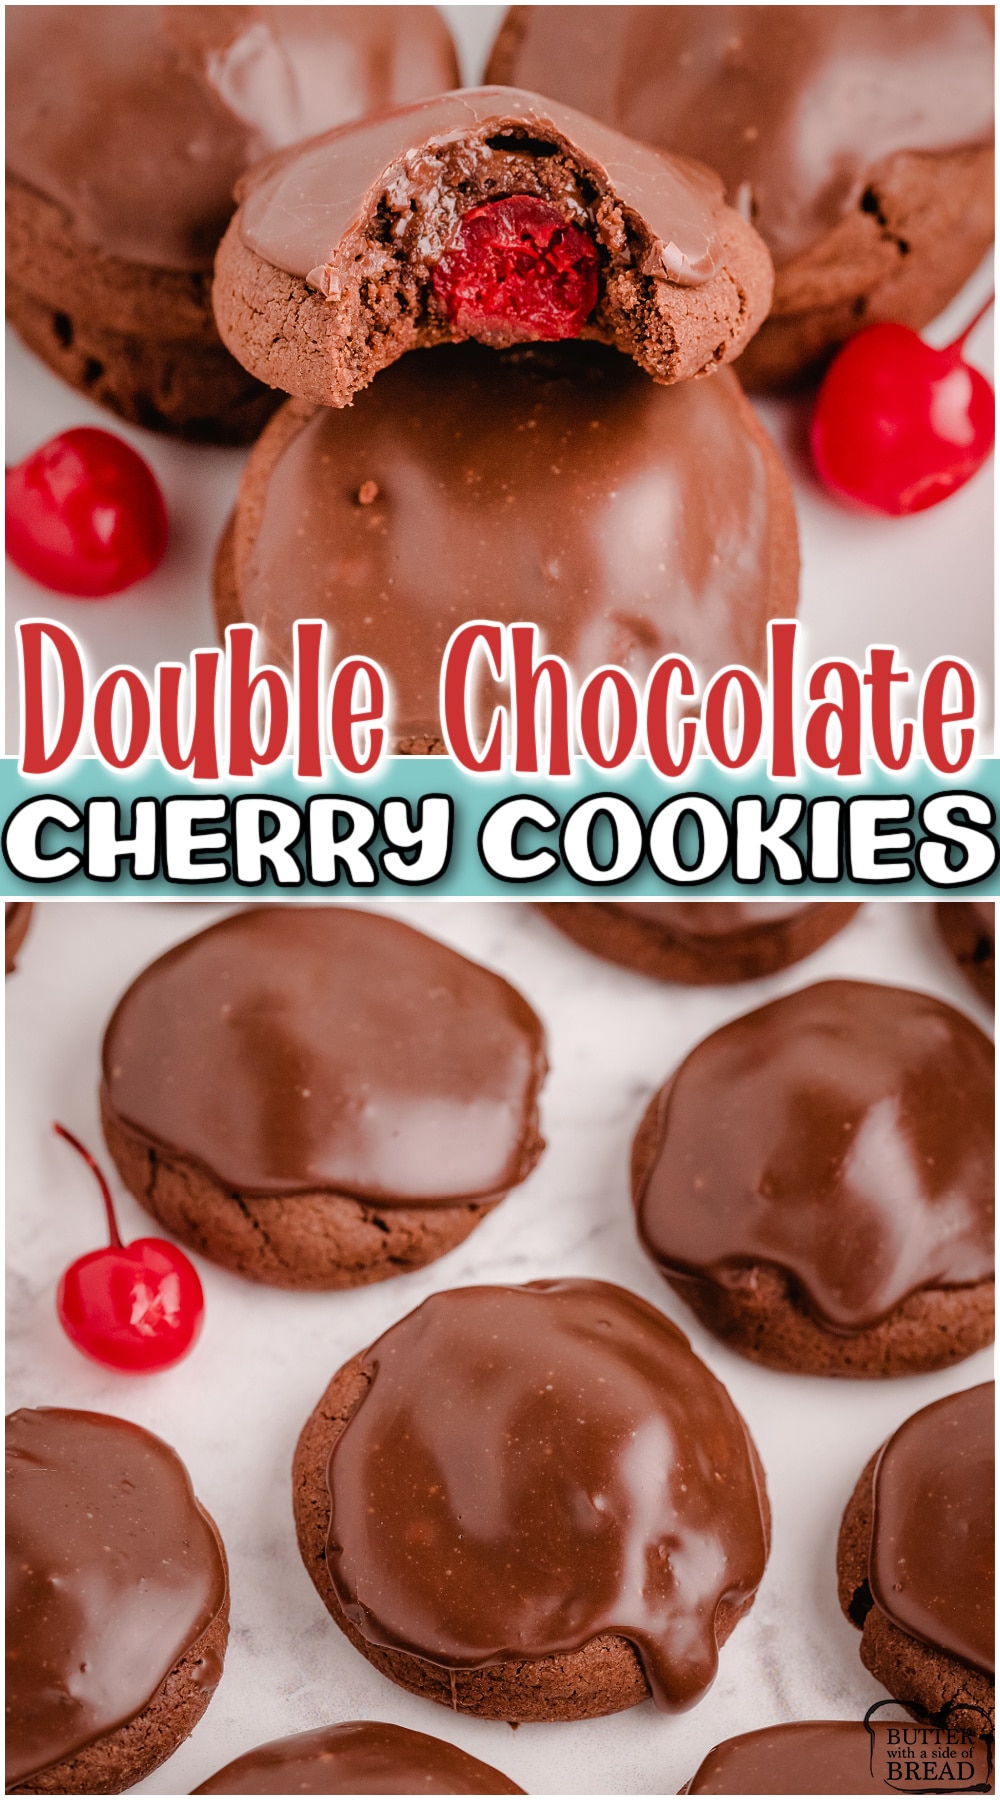 Double Chocolate Cherry Cookies are soft chocolate cookies with a sweet cherry baked in the center! Amazing cherry cookies topped with a luscious chocolate ganache that is every chocolate lovers dream come true!